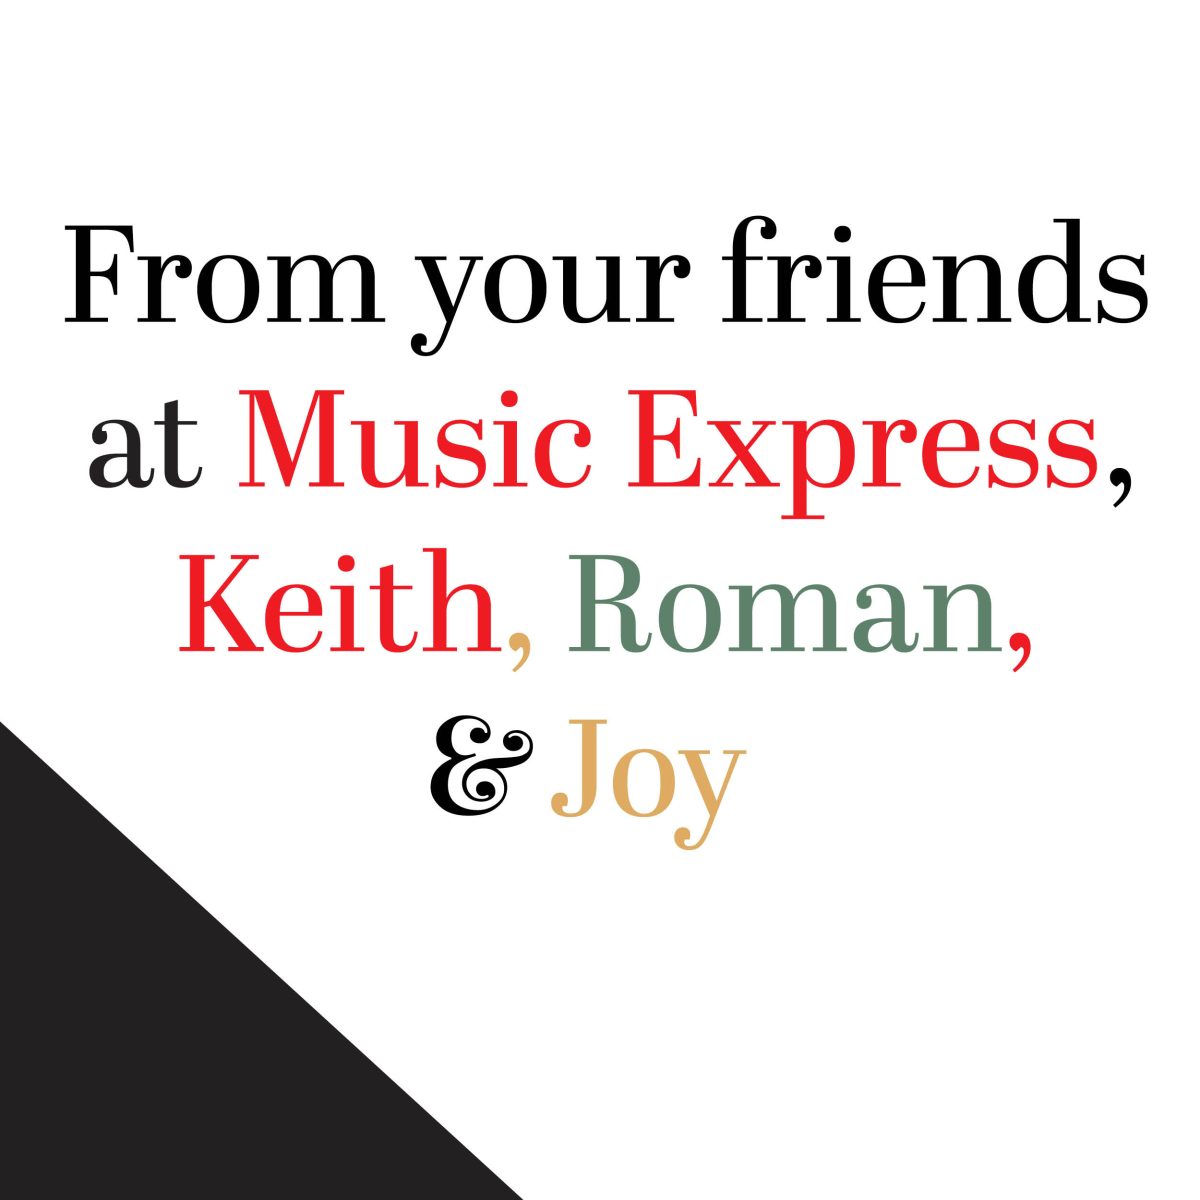 Merry Christmas & Happy New Year!
From your friends at Music Express, Keith, Roman, and Joy!